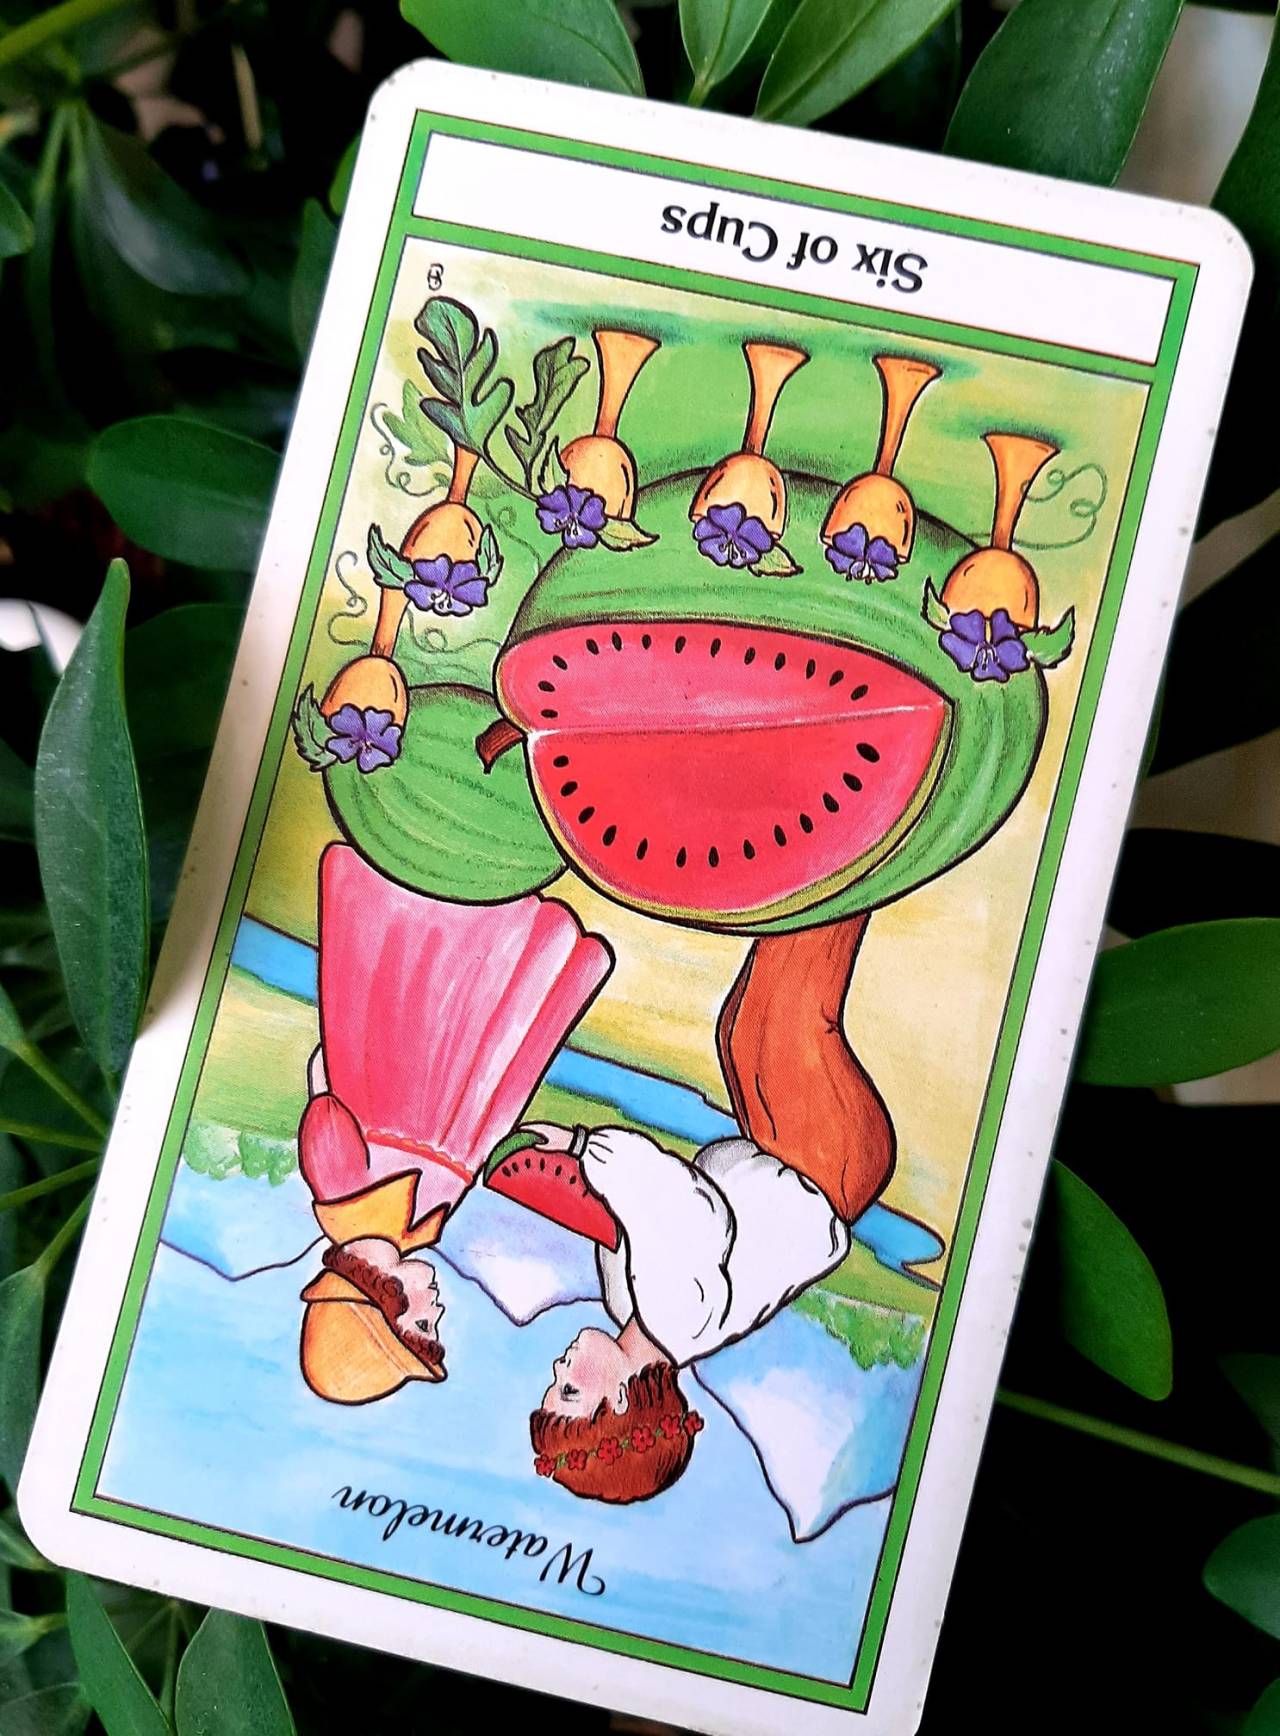 Card for Friday, January 21st, 2022Six of Cups inverted
paired with
Watermelon (Citrullus vulgaris)The suit of Cups is related to the act of feeling. Cups encourage us to explore our imaginative self, our emotional responses, reactions,  dreams, and psychic connections. Inverted, this suit invites us to review our emotions about our emotions, and our feelings about our feelings, so to speak.Numerically,  six is a number of equilibrium, and harmony. Sixes are said to energetically connect the upper to the lower, through which flows unconditional love, nurturing and healing. Sixes remind us to balance our outer aspirations with our inner desires, both the material and the spiritual.Today’s card, the Six of Cups is full of playful energy. The visual of one child offering another a slice of Watermelon on a bright, sunny day brings to mind nostalgic feelings of long ago, when life felt simpler. Gazing at this card, we can reawaken the joy filled child within. Inverted, the Six of Cups follows the theme of this new year suggesting that we build and nurture ourselves going forward.Watermelon is known primarily as a food but also has a history as a medicinal. The seeds can be crushed and made into a tea and used to support the urinary system, including inflammation of the bladder and kidney, fluid retention and edema, blood in the urine and urinary stones. As a food, Watermelon is a cooling refrigerant, useful in reversing dehydration caused by hot weather and in the presence of heat stroke. Containing Vitamins A, B6, and C, iron, potassium, lycopene, anti-oxidents, and various amino acids, Watermelon may also improve heart health, decrease inflammation and oxidative stress, and relieve muscle pain.Energetically, Watermelon can cool the excess heat of anger and aggression. Eating Watermelon reminds us of hot, lazy summer afternoons when we can take time out to savor life. We have been shown multiple cards of balance, self exploration and self care these past weeks; extensively in fact, since the Fall Equinox. It is good to remind ourselves every so often that life also contains lessons of a pleasurable nature. Today we are being called yet again to add more play to our lives, to get back in touch with our innocent side, to not take anything too seriously, to walk The Middle Way. The Six of Cups, upright or inverted, also speaks to the possibility of something from our past connecting to, or bringing us rewards in, the present or near future. Any way you choose to slice it, the Six of Cups is a card of pure sweetness and good cheer. Be open in your heart today as you lovingly give and receive the gifts the Universe has for you. It’s okay to take a day off from worry and self improvement. Make time instead to recharge your batteries with some simple pleasure that brings you joy. Refill your cup with delight in the wonder that is you. It is our greatest gift to ourselves.—————————*Information shared on herbs and their historical or traditional uses is for point-of-interest only. None of the above is meant to diagnosis, treat, or cure any health imbalances.*Tarot deck : The Herbal Tarot by Michael Tierra LaC, and Candis Cantin
Interpretation : Teri “Cricket” Heinichen Owens, RN, BSN, MS #tarot#tarotdaily#tarotdailydraw#taroteveryday#tarotoftheday#tarotoftumblr#tarotofinstagram#tarotcommunity#tarottribe#tarotscope#dailytarot#dailytarotdraw#dailytarotcard#dailytarotreading#herbalmedicine#herbaltarot#midwestherbschool